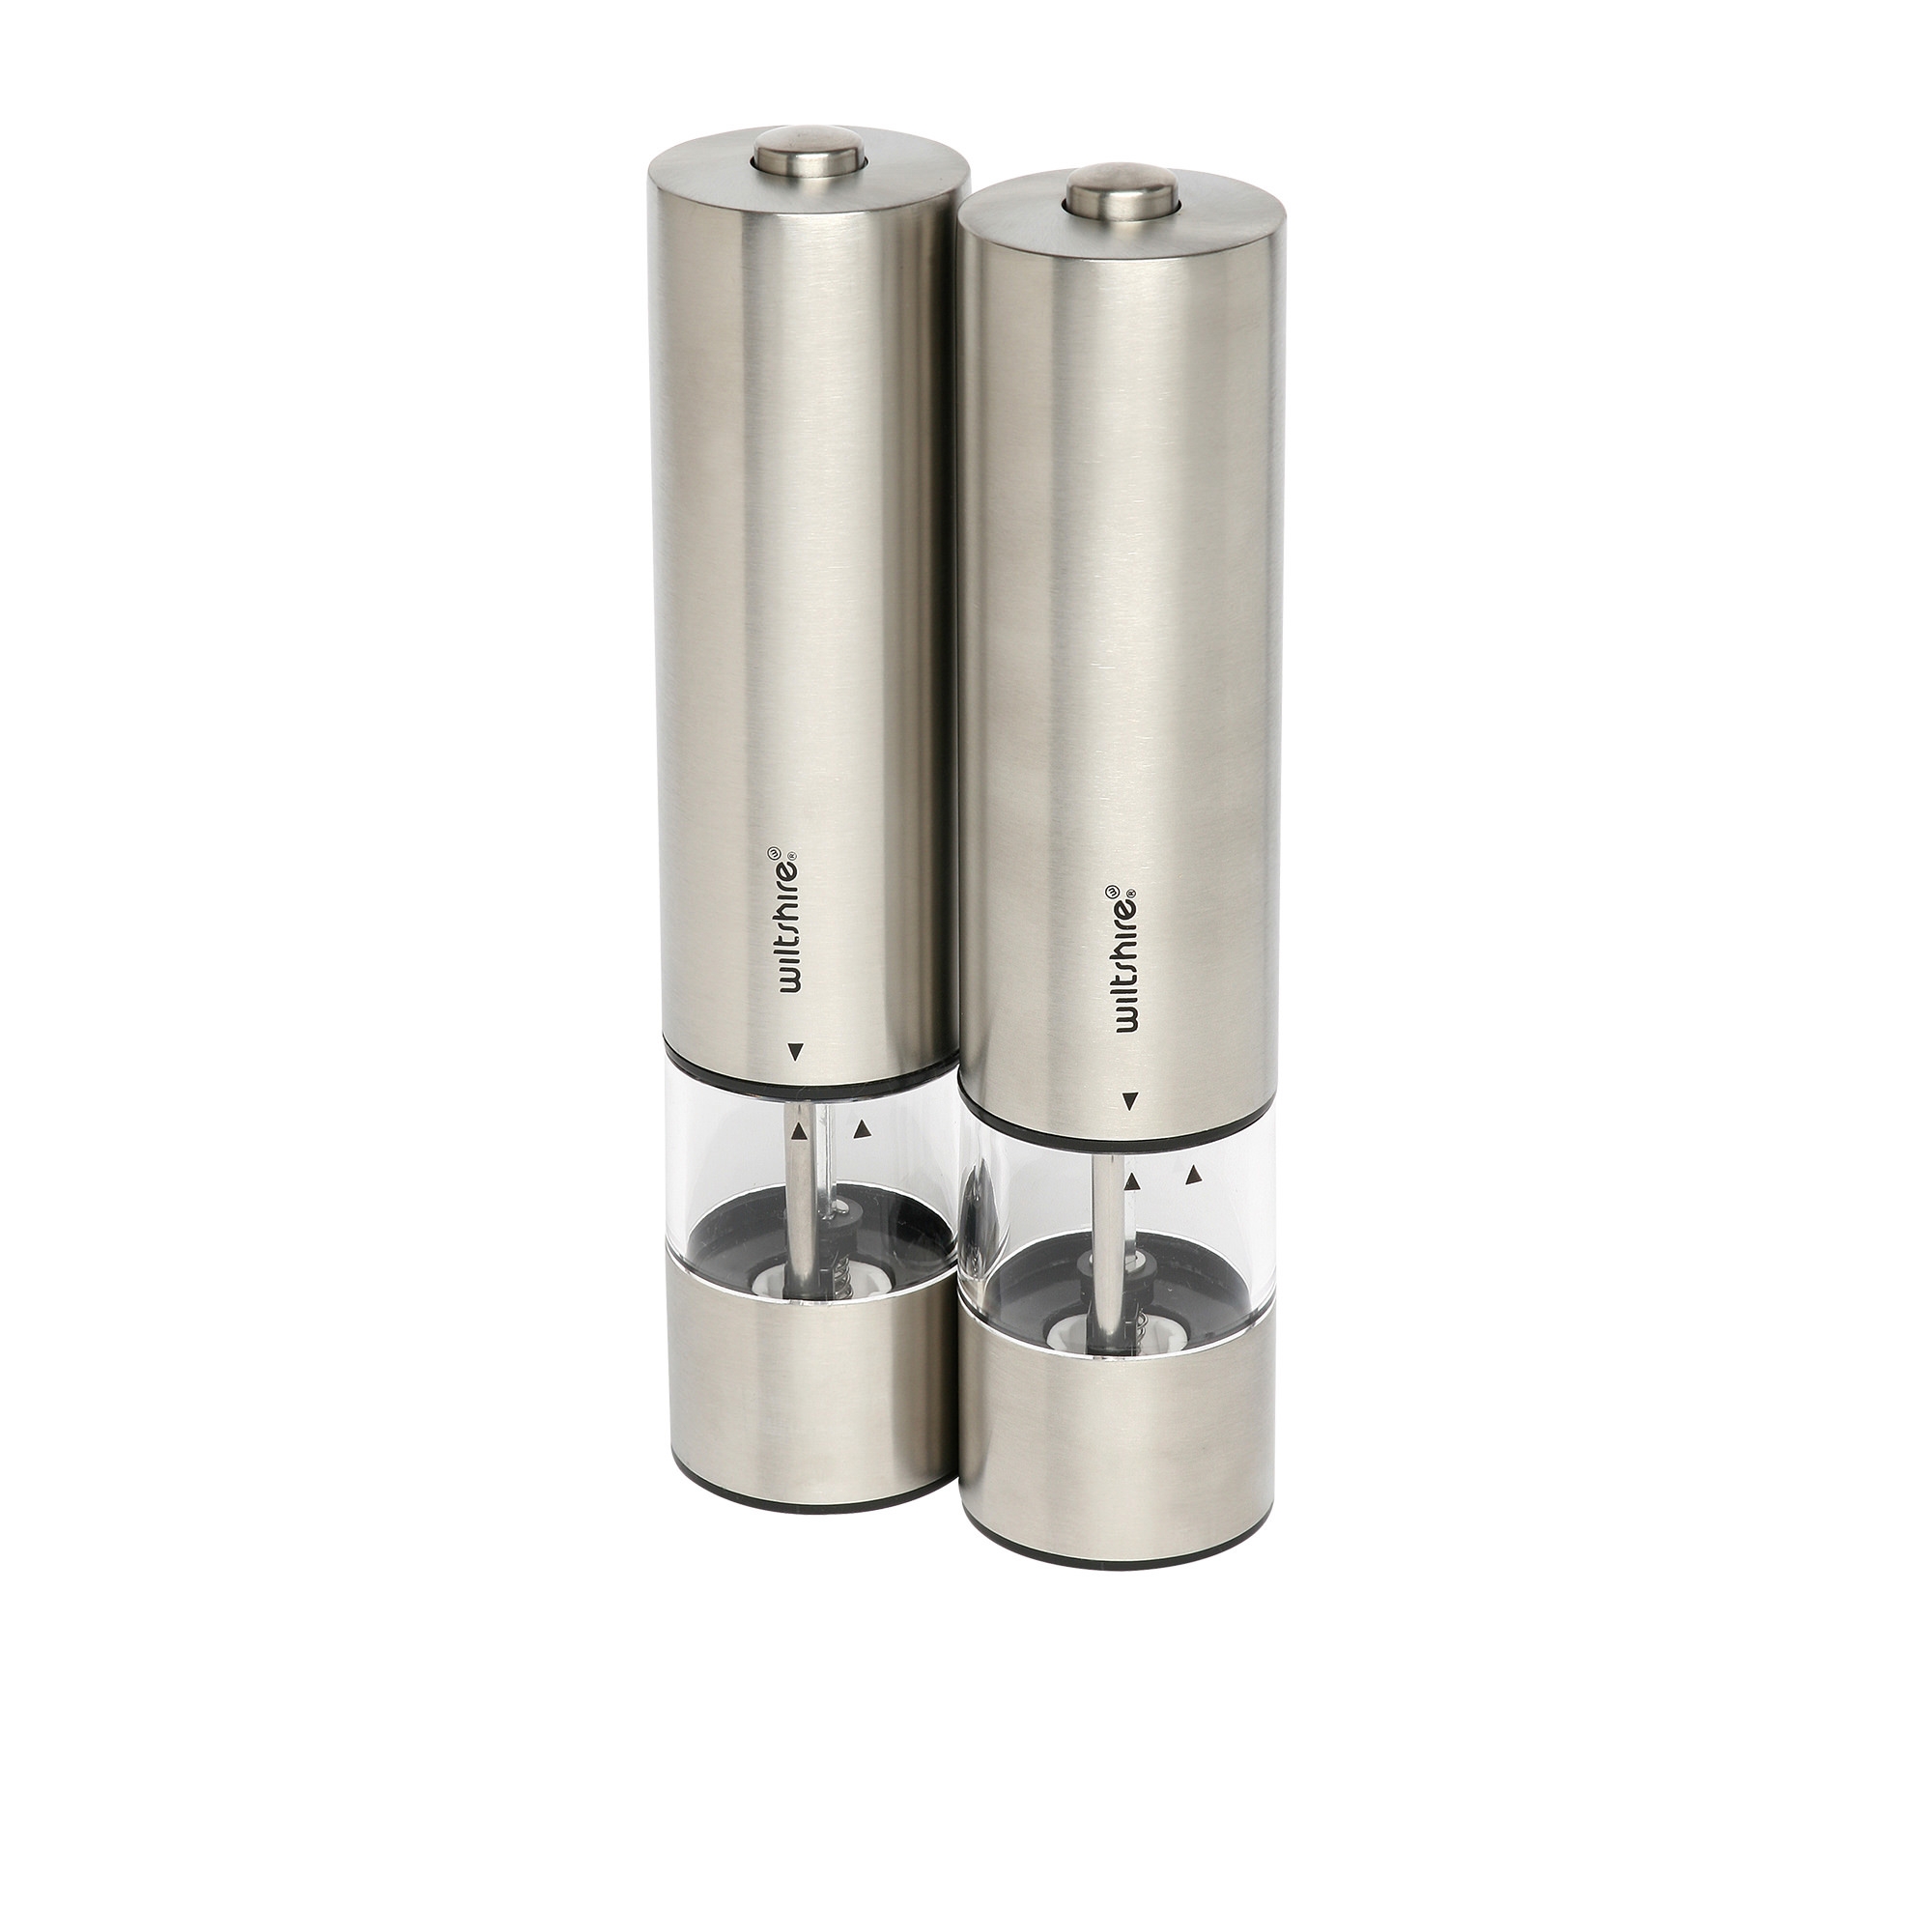 Wiltshire Electric Mill Set Stainless Steel Image 1